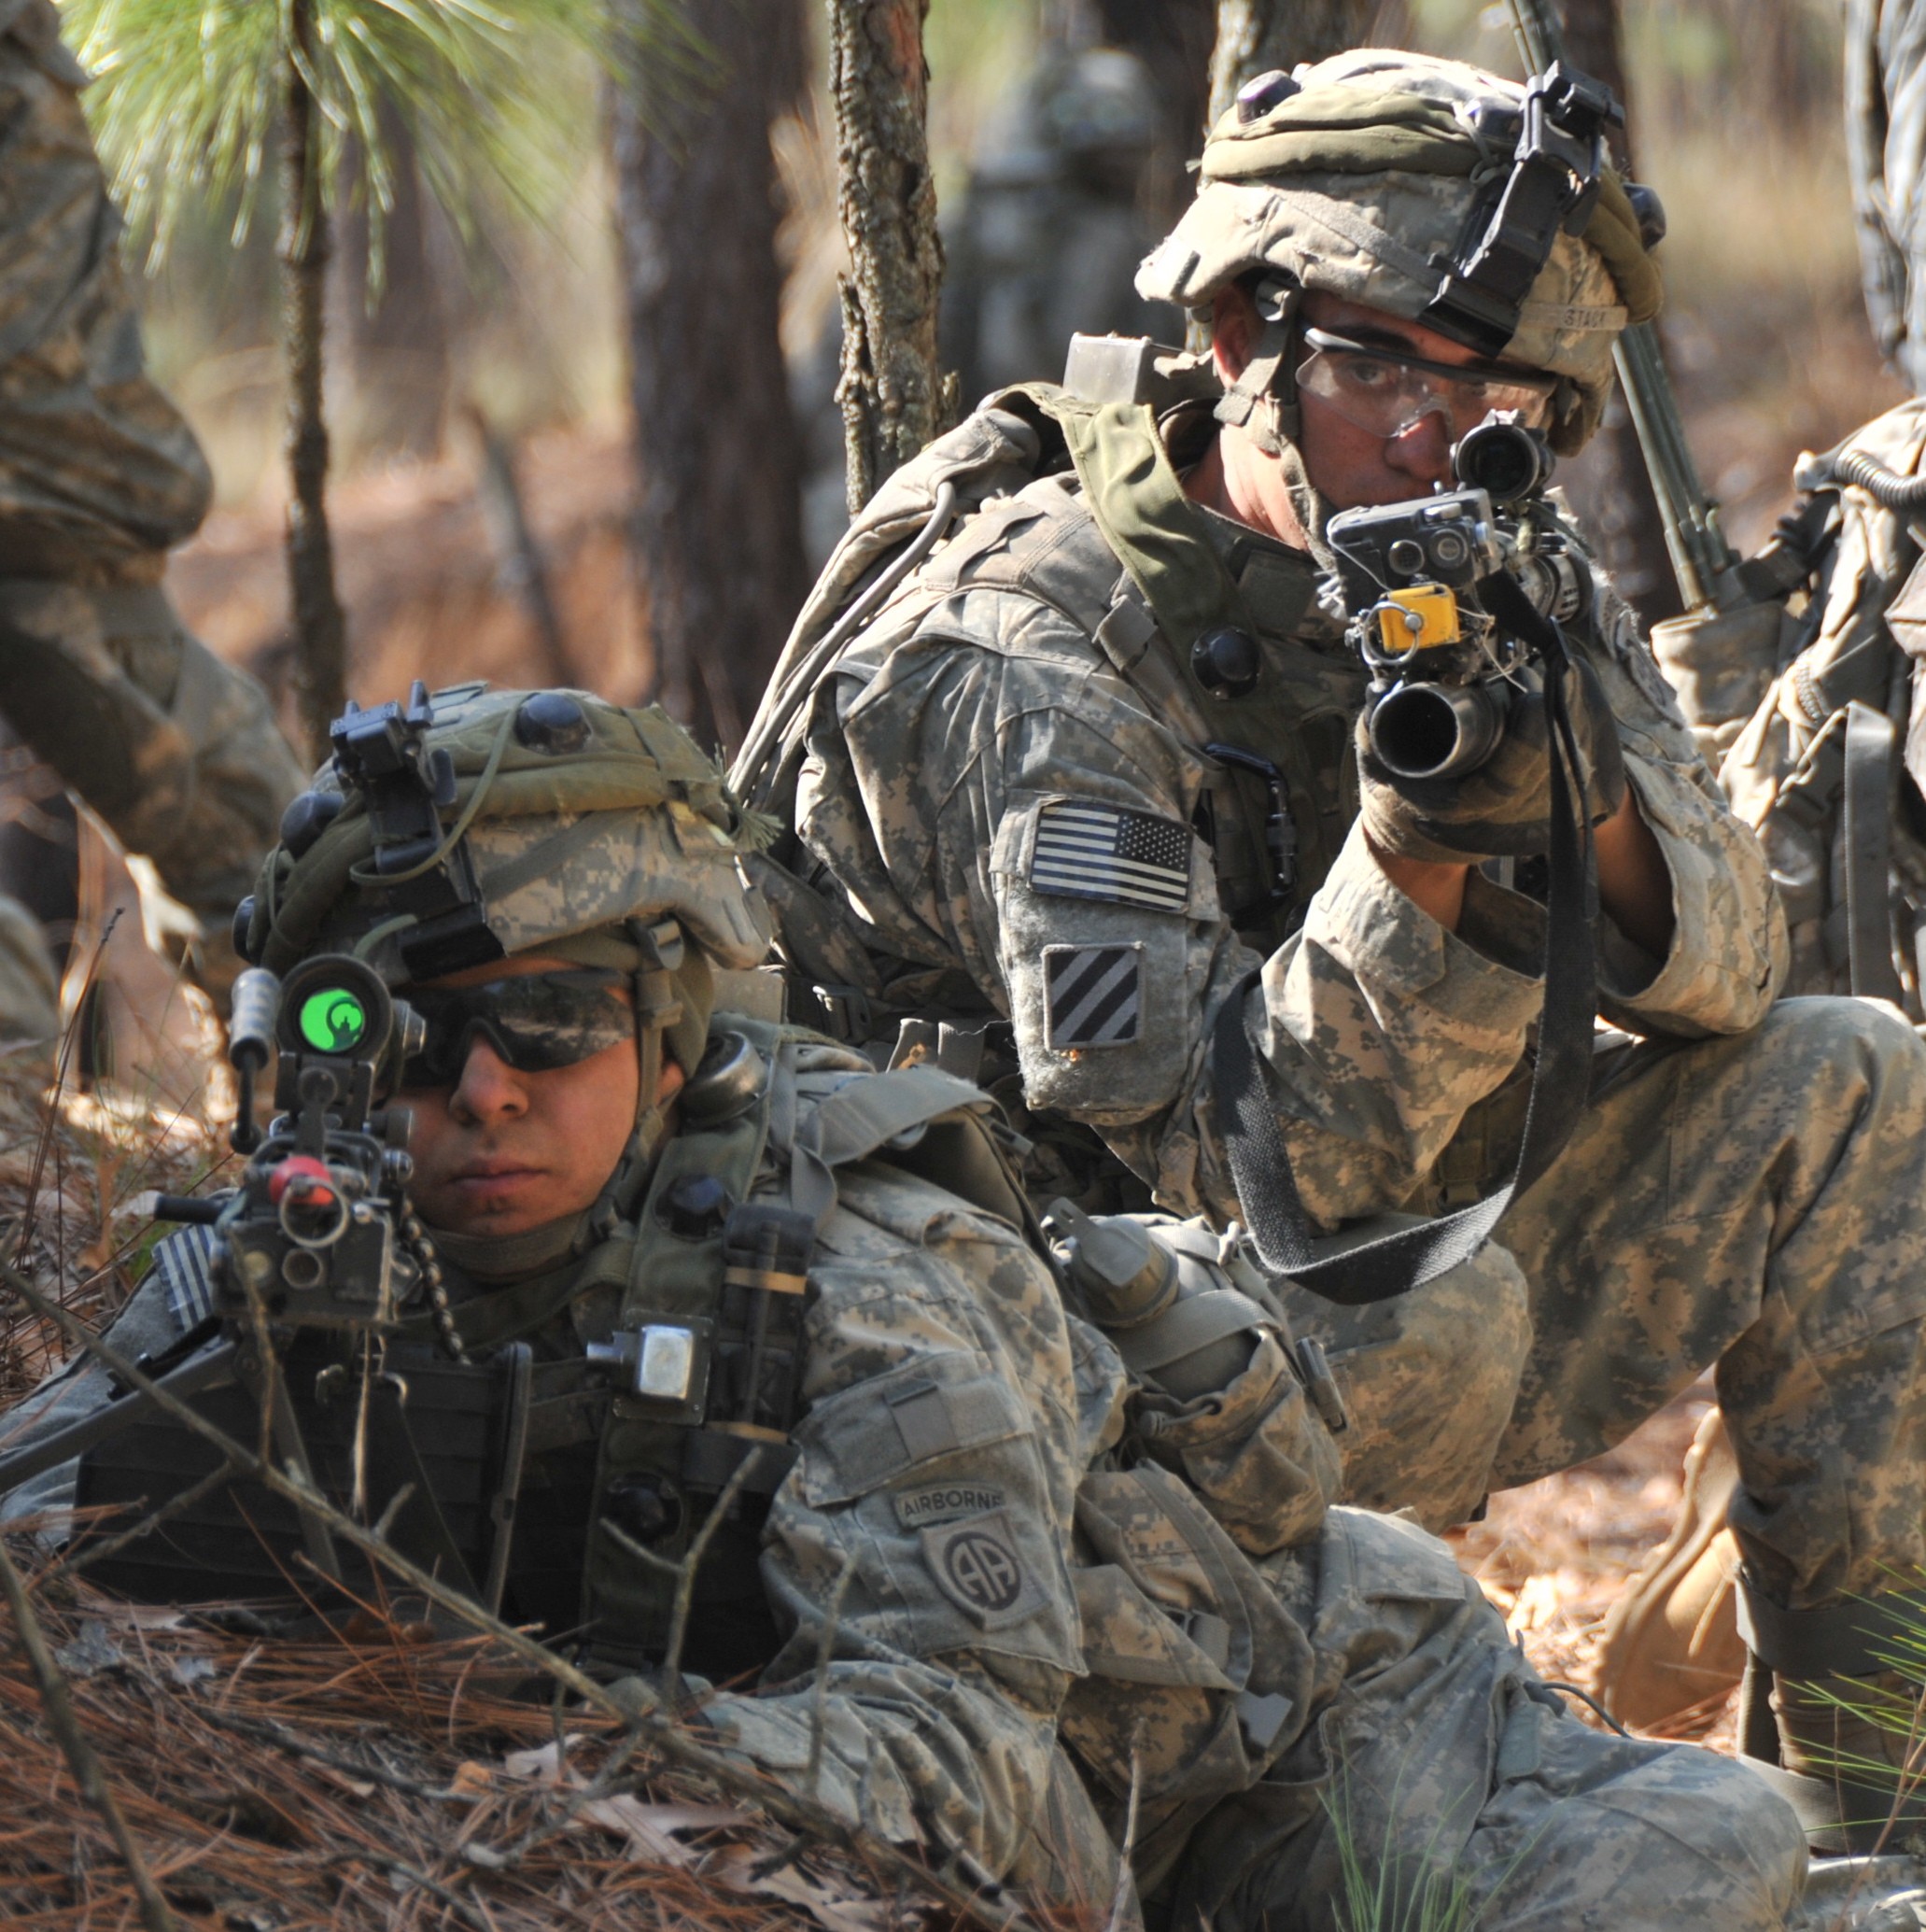 JMTC exports training capability to Fort Bragg Article The United